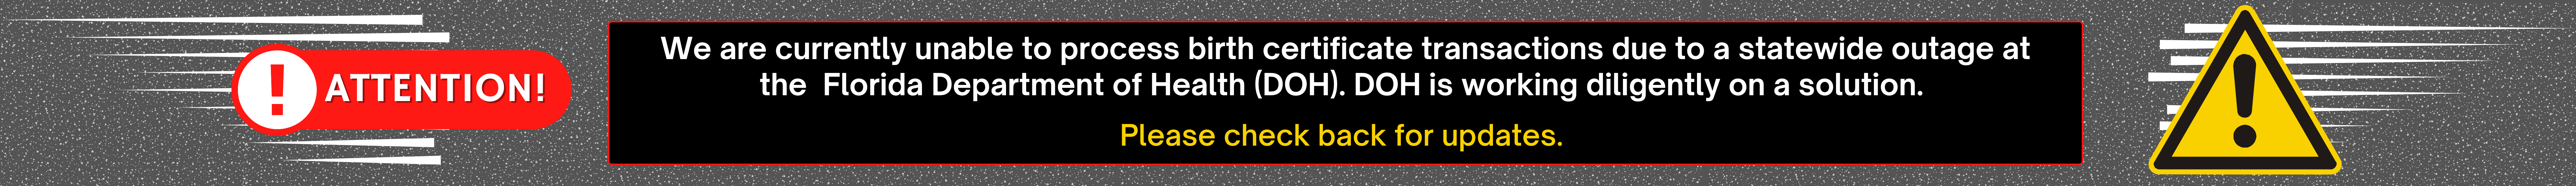 We are currently unable to process birth certificate transactions due to a statewide outage at the Florida Department of Health (DOH). DOH is working diligently on a solution. Please check back for updates.